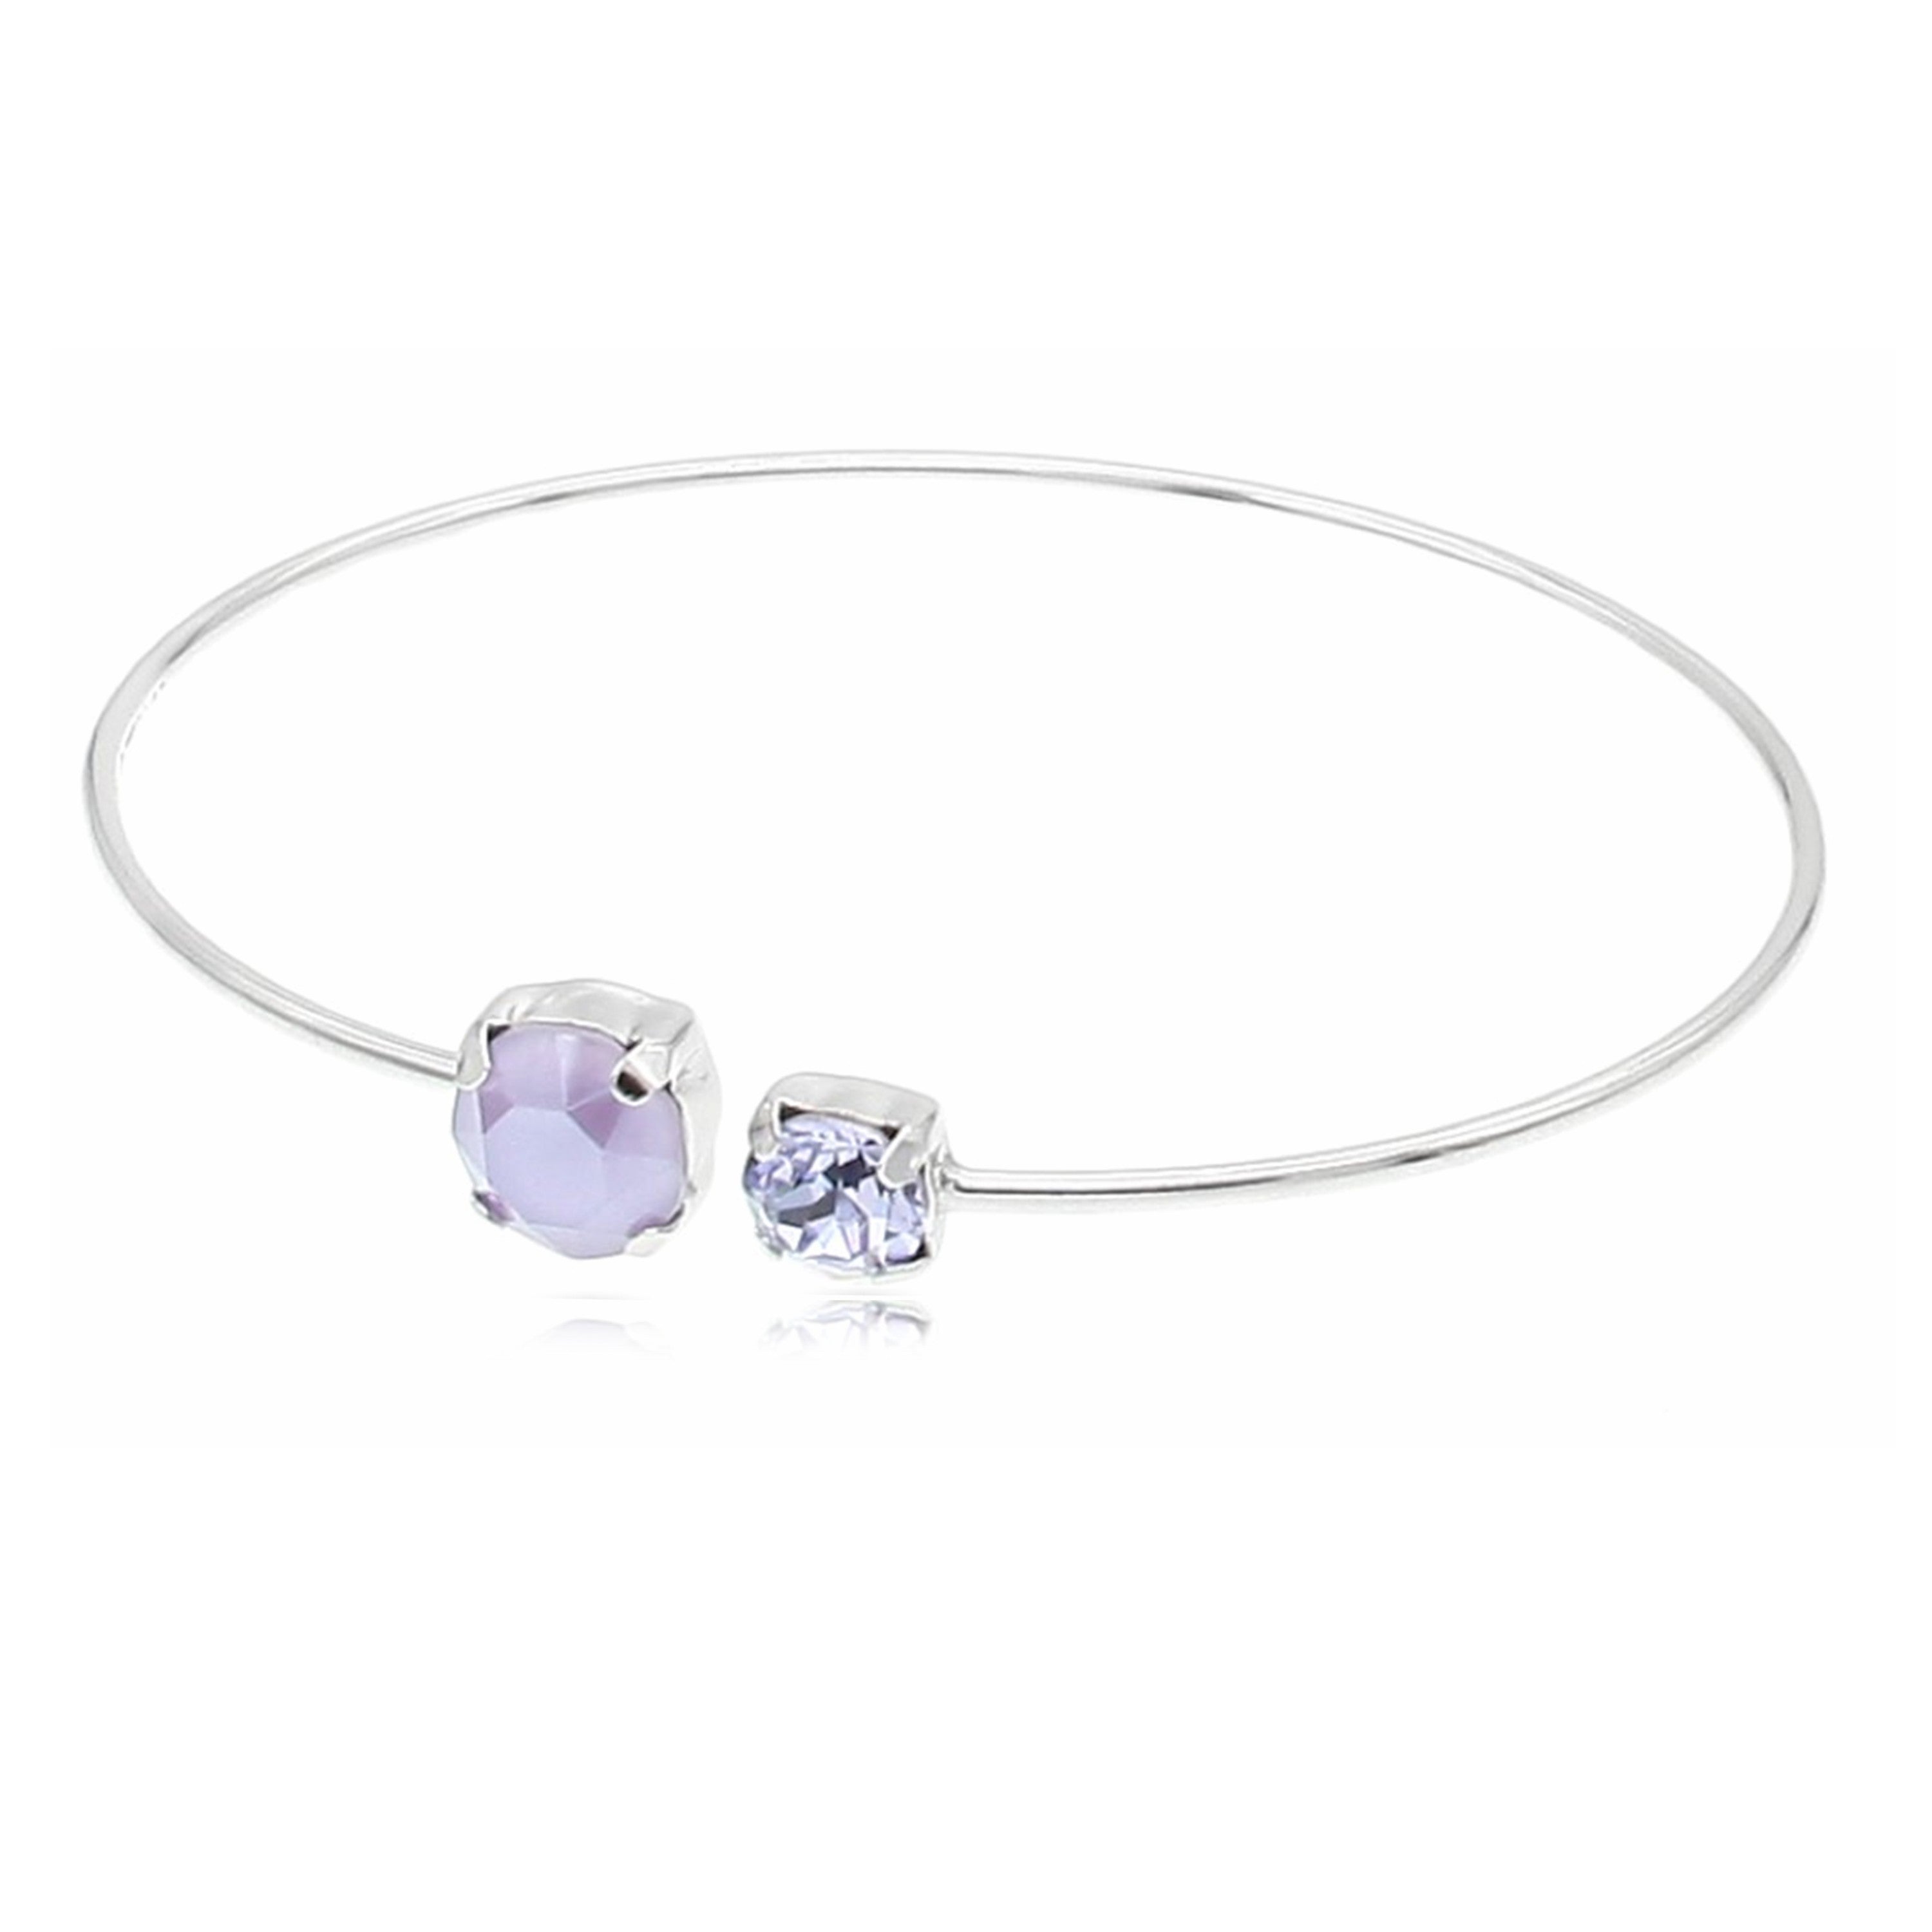 Sterling Silver Flexi Bangle by Davvero with Crystals from Swarovski®